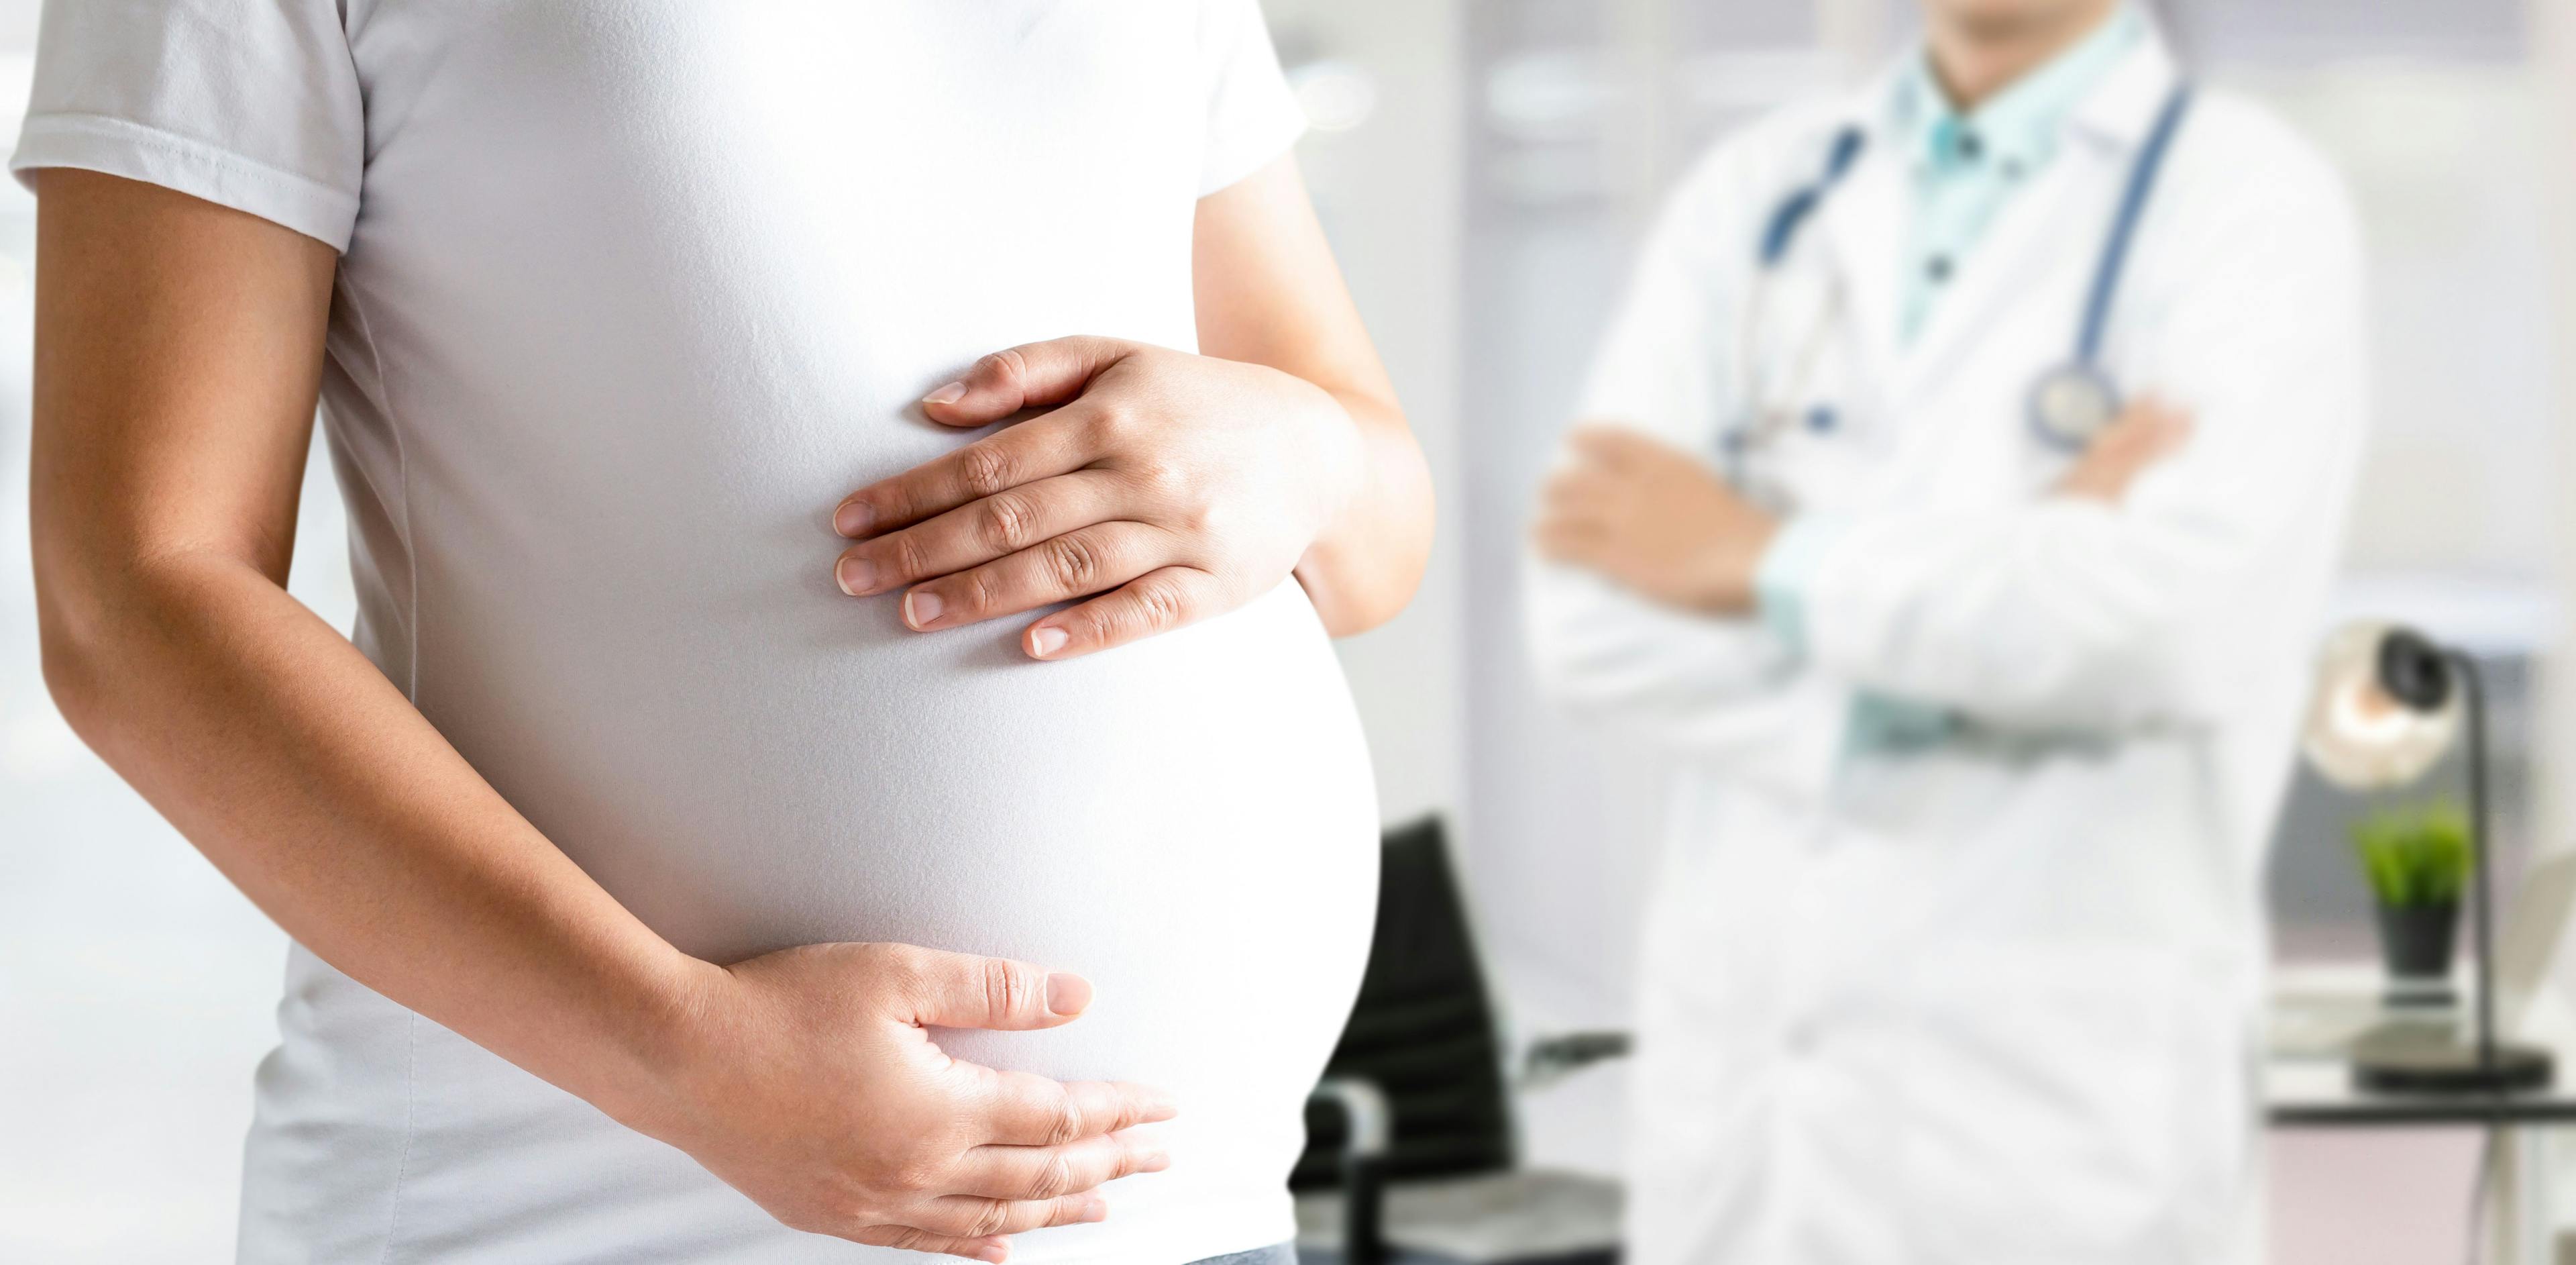 Optimal prenatal opioid use disorder care may reduce odds of preterm birth